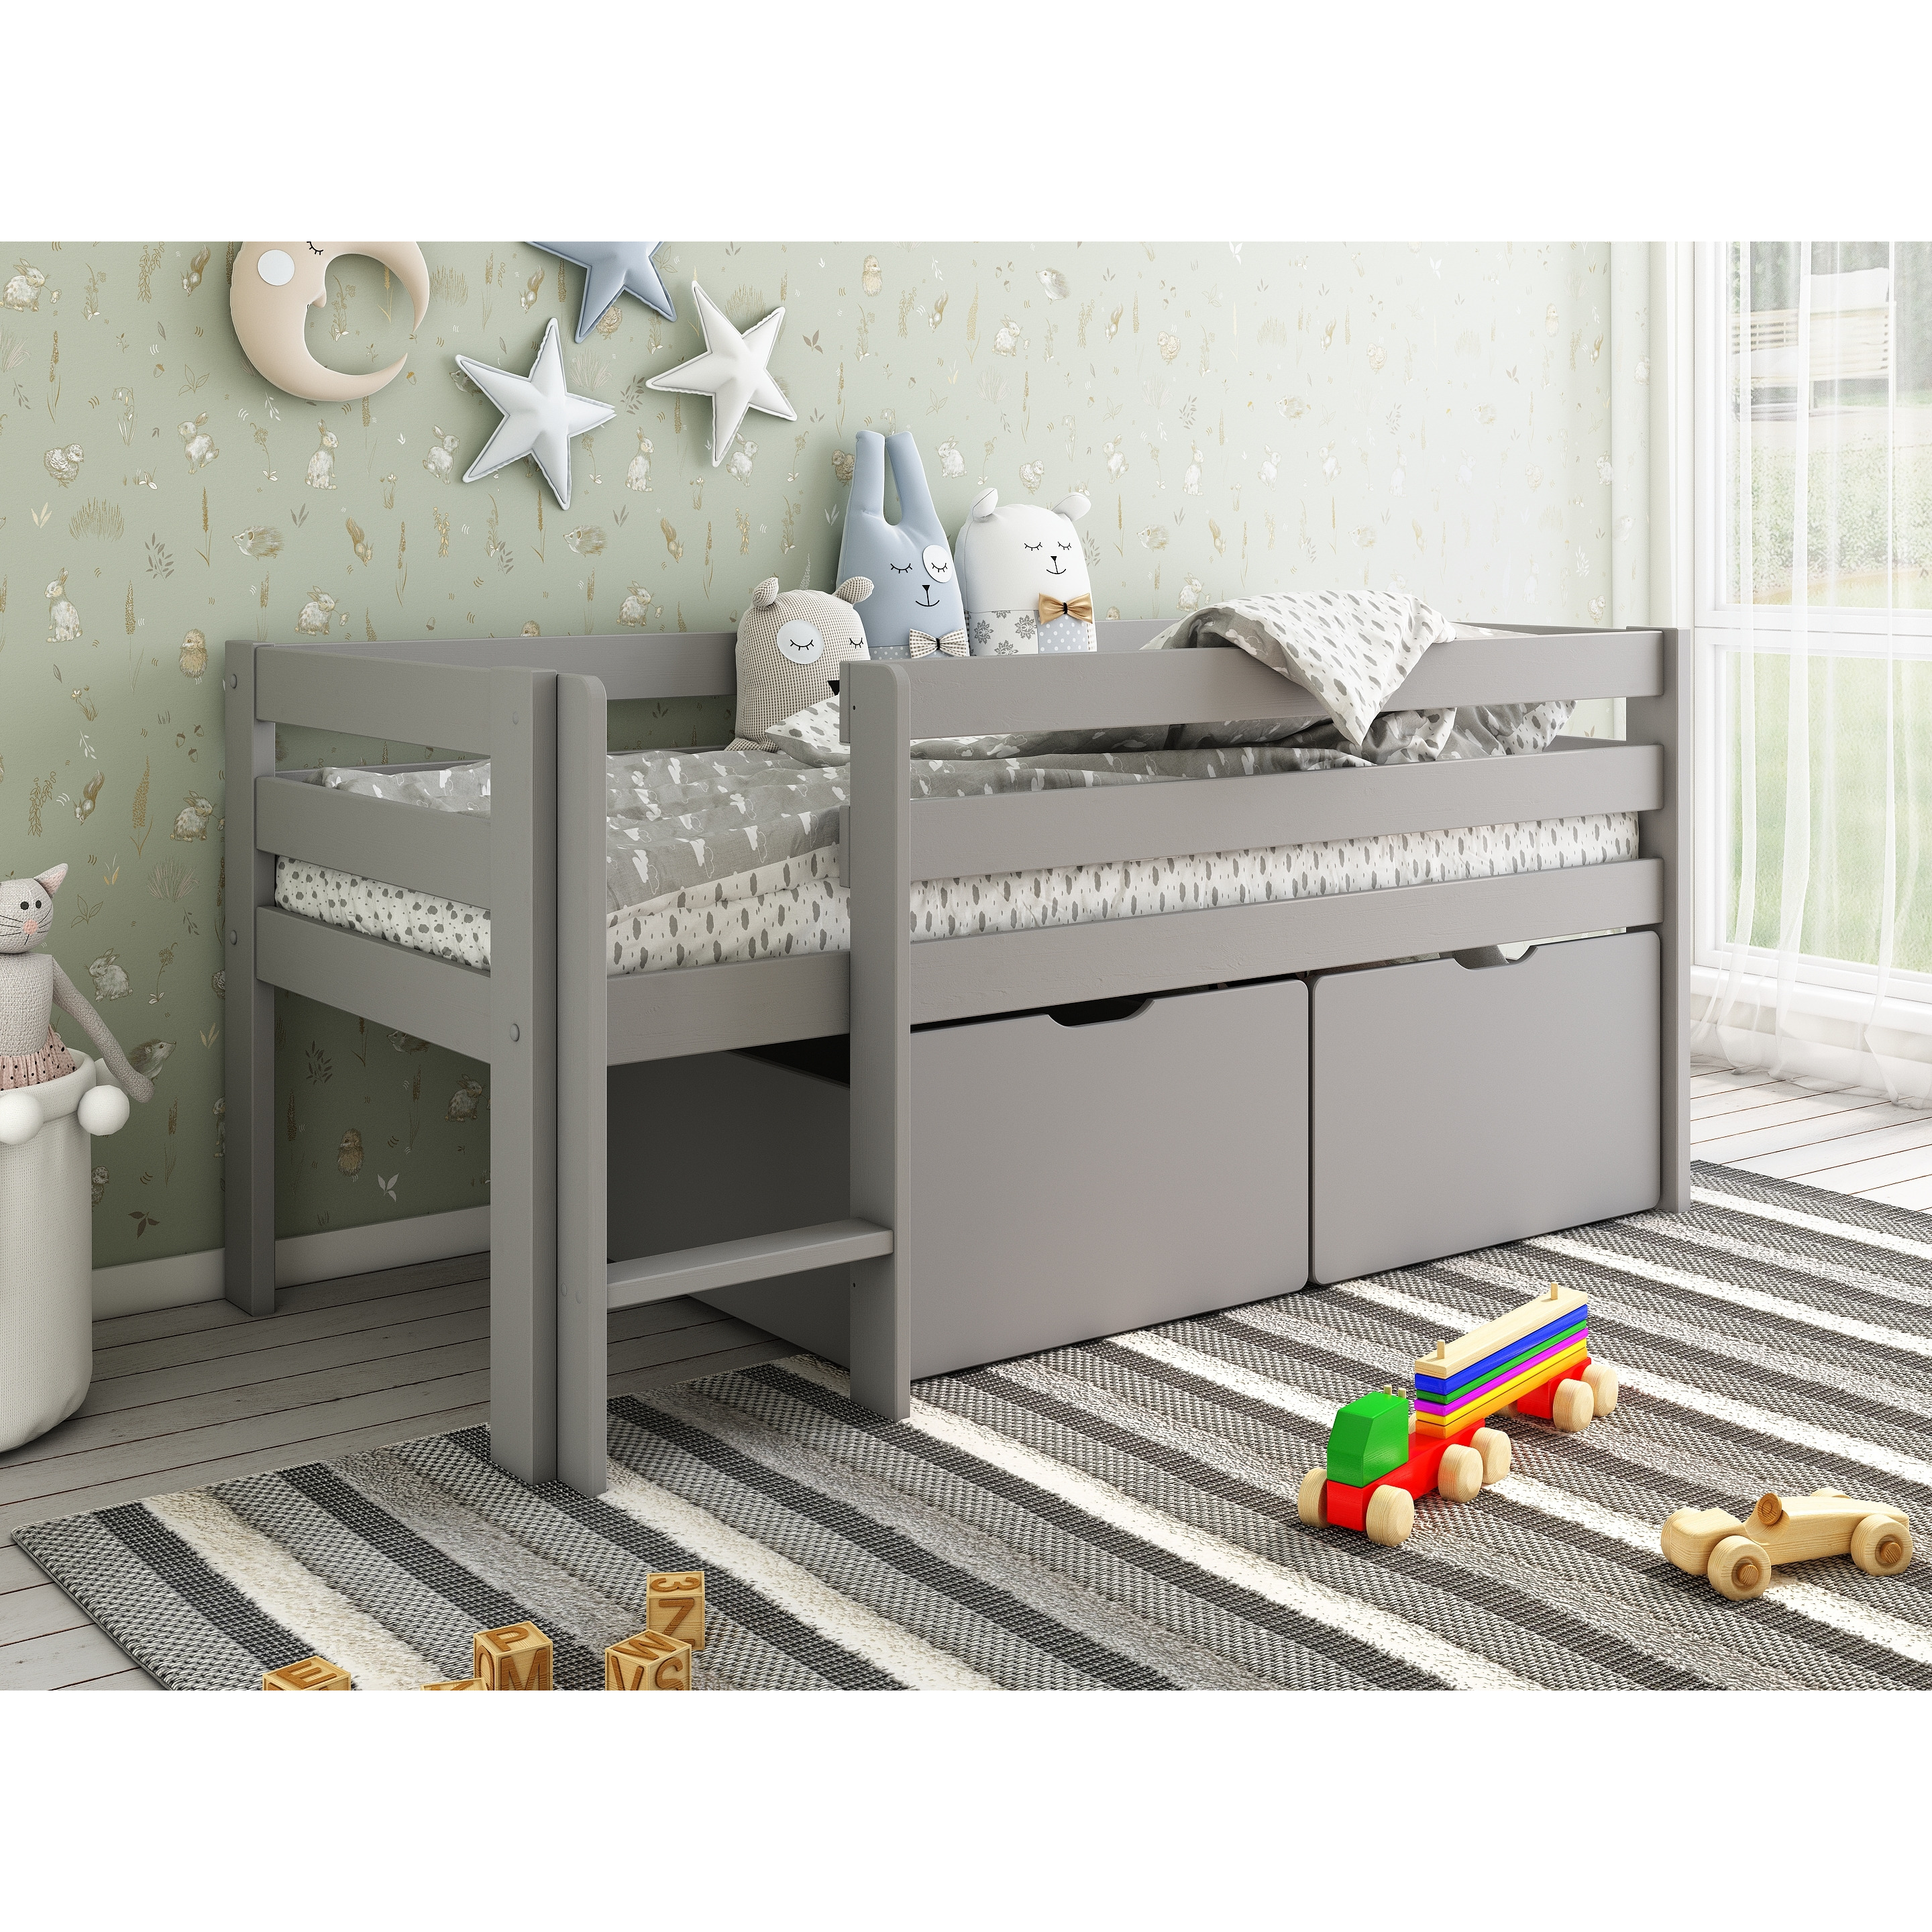 Noomi Shorty Midsleeper With Crate Drawer Set (FSC-Certified) Grey